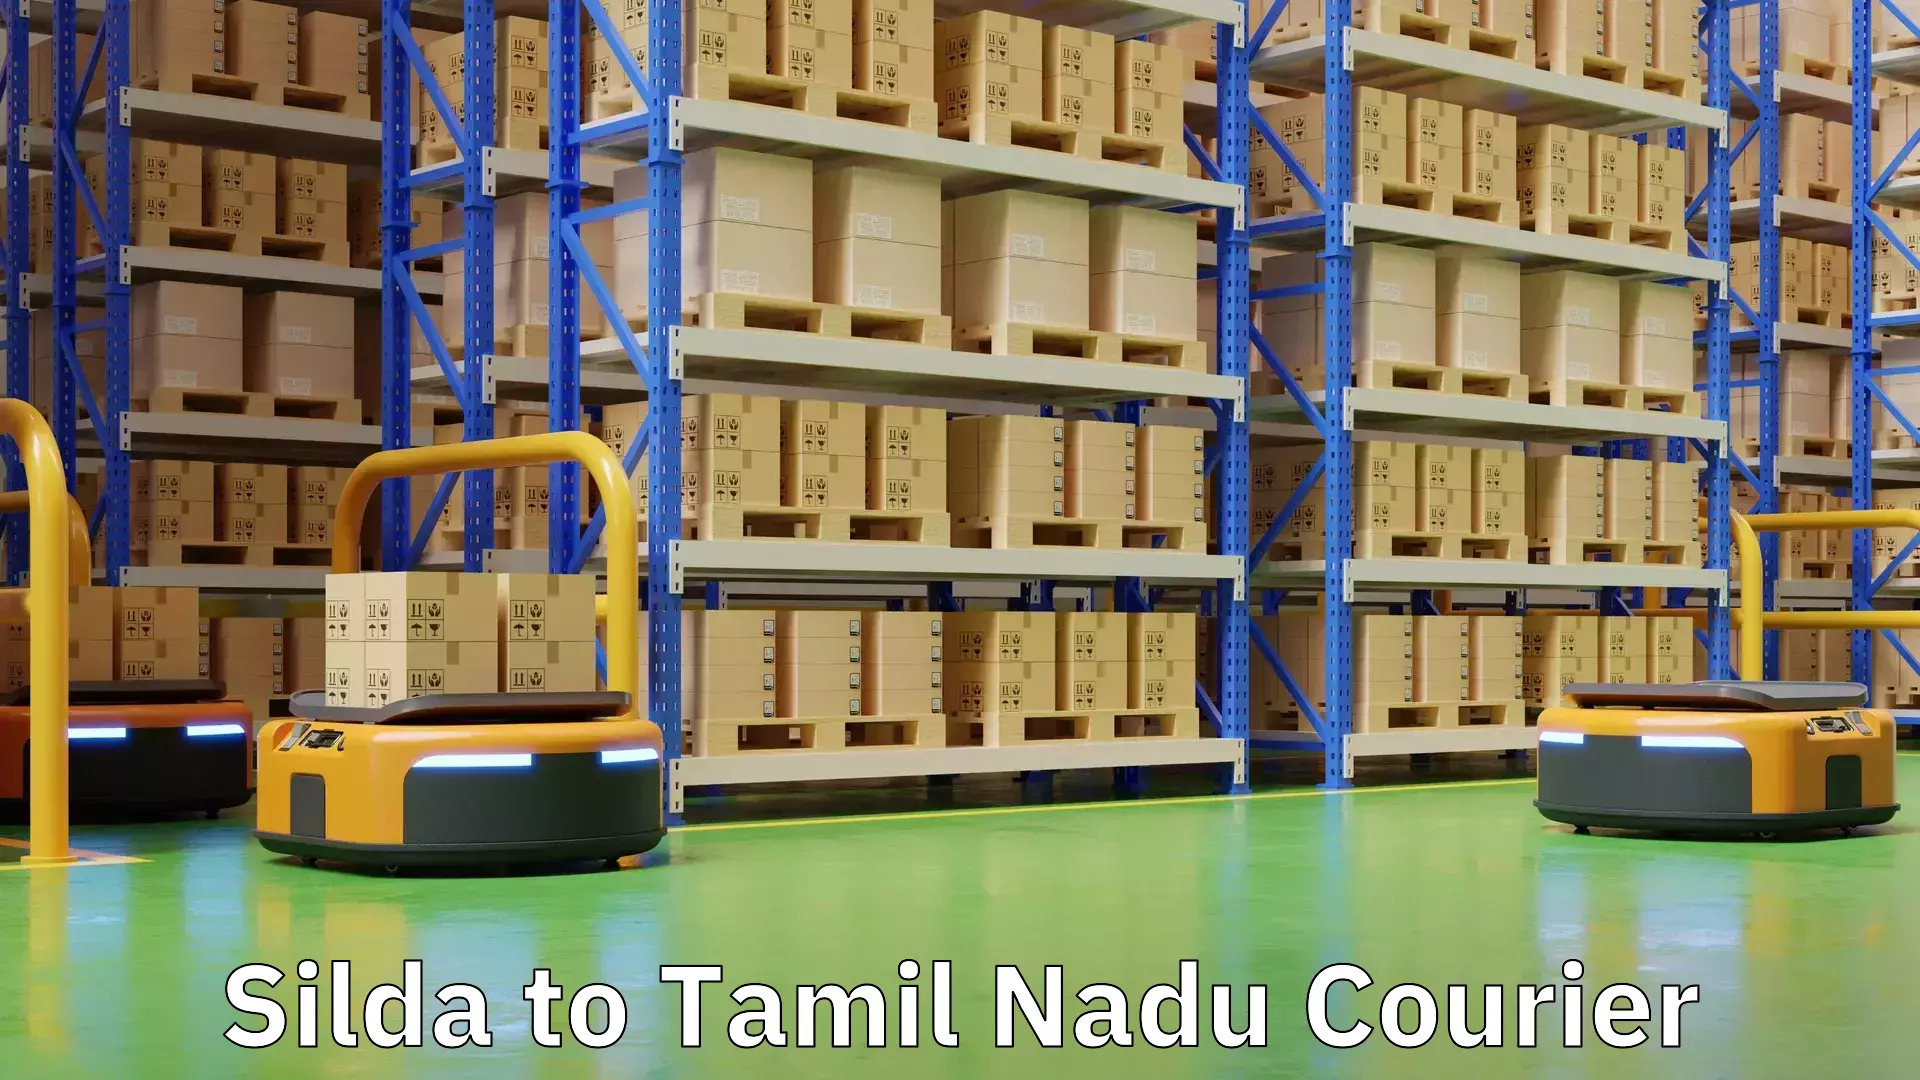 Express courier capabilities Silda to Tamil Nadu